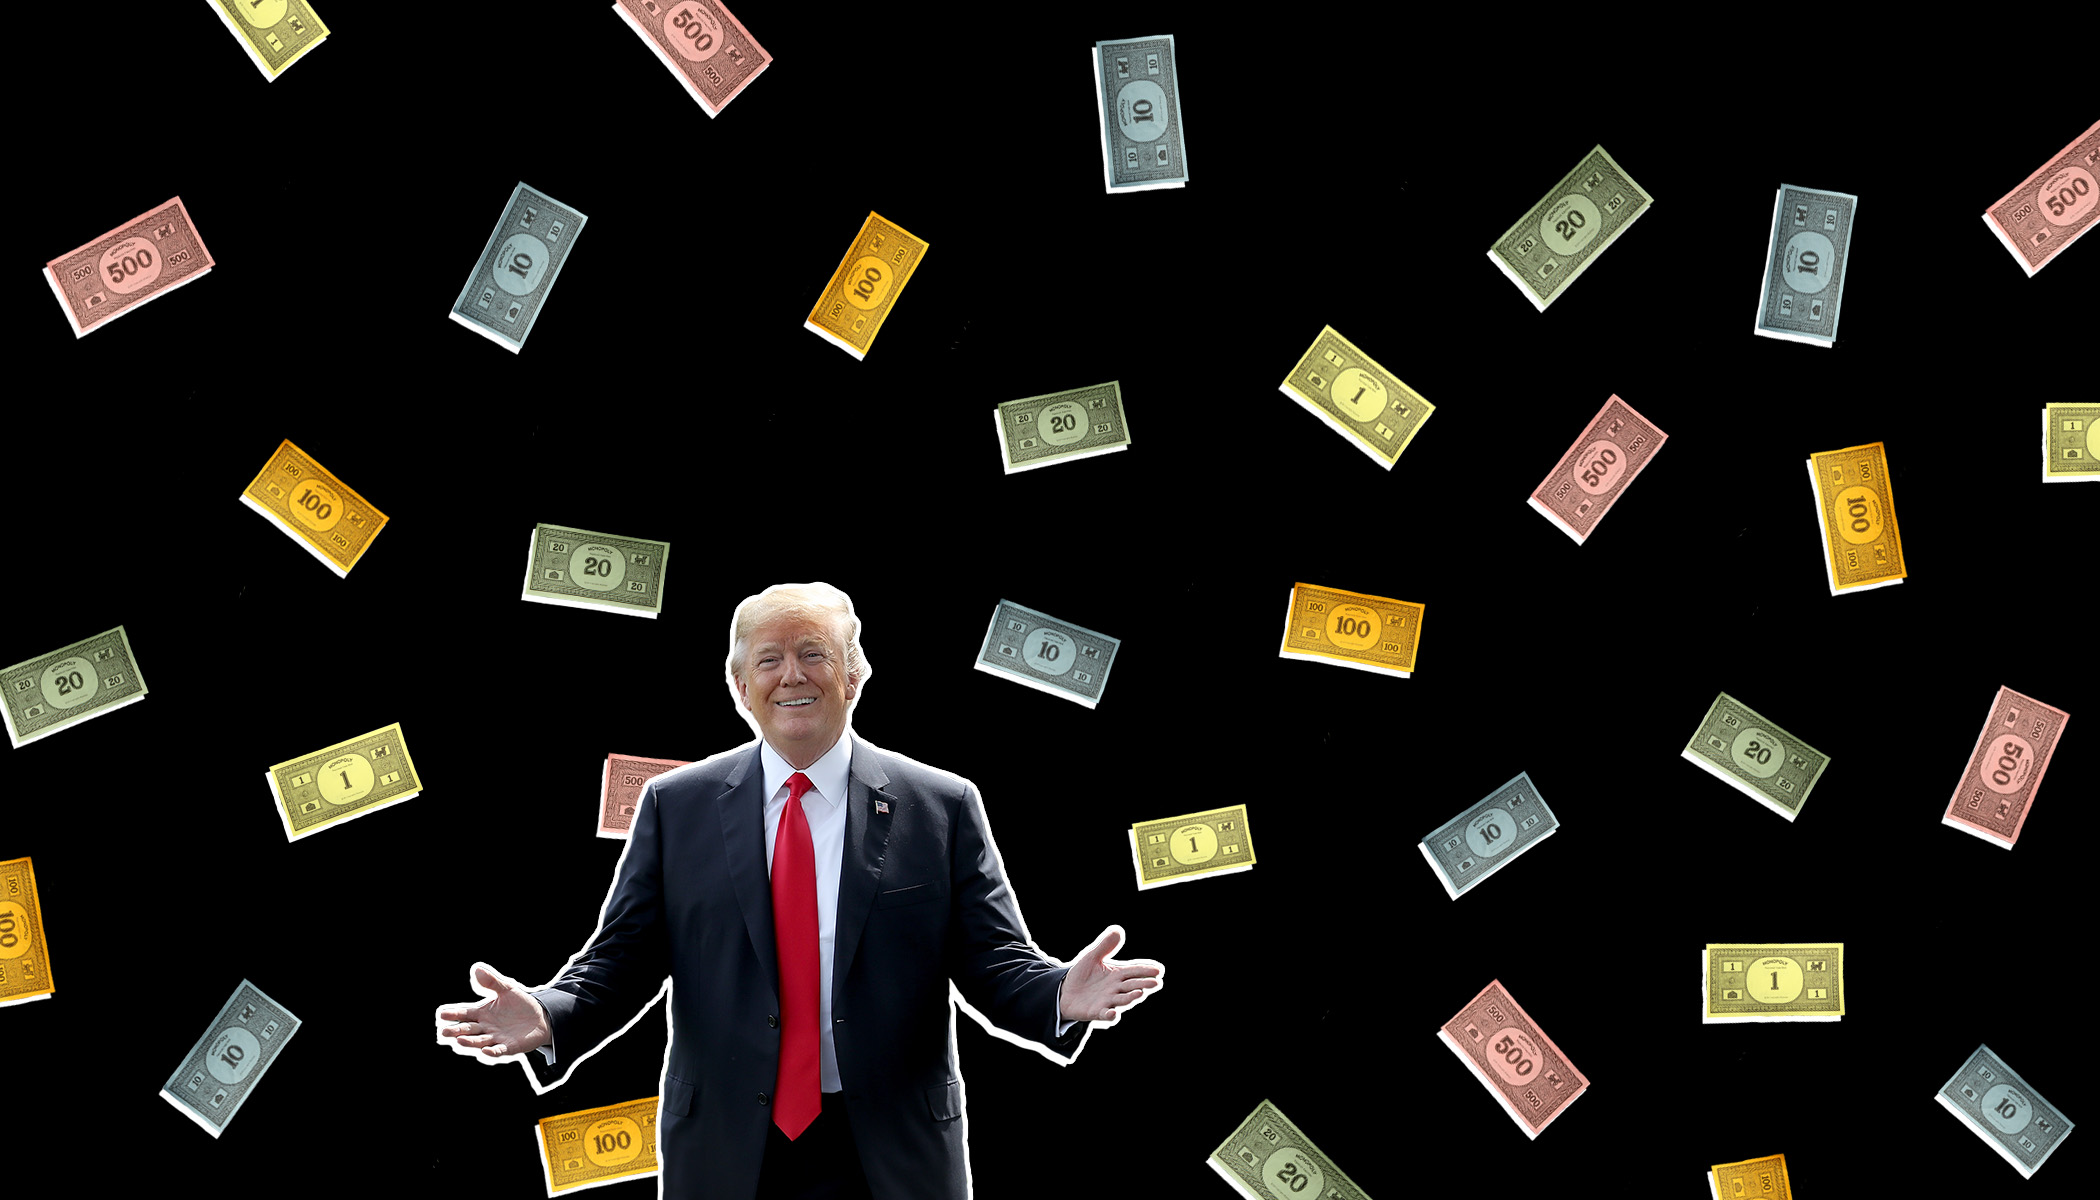 President Trump surrounded by falling Monopoly money